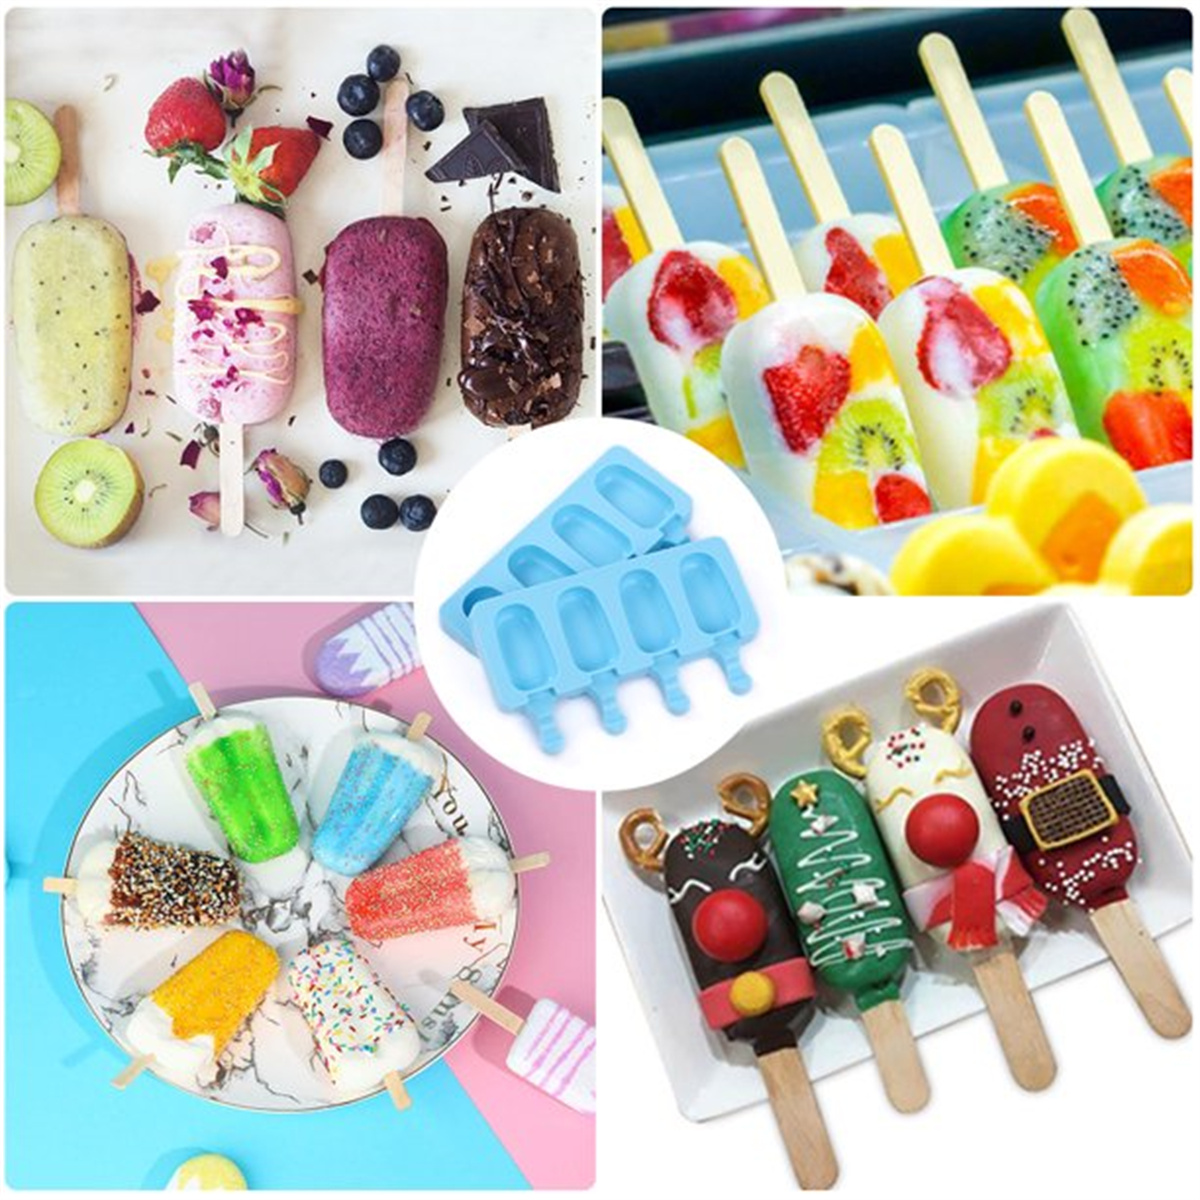 Popsicle Molds Set of 2,Casewin Ice Pop Molds Silicone 4 Cavities Ice Cream  Mold Oval Cake Pop Mold with 100 Wooden Sticks for DIY Popsicle